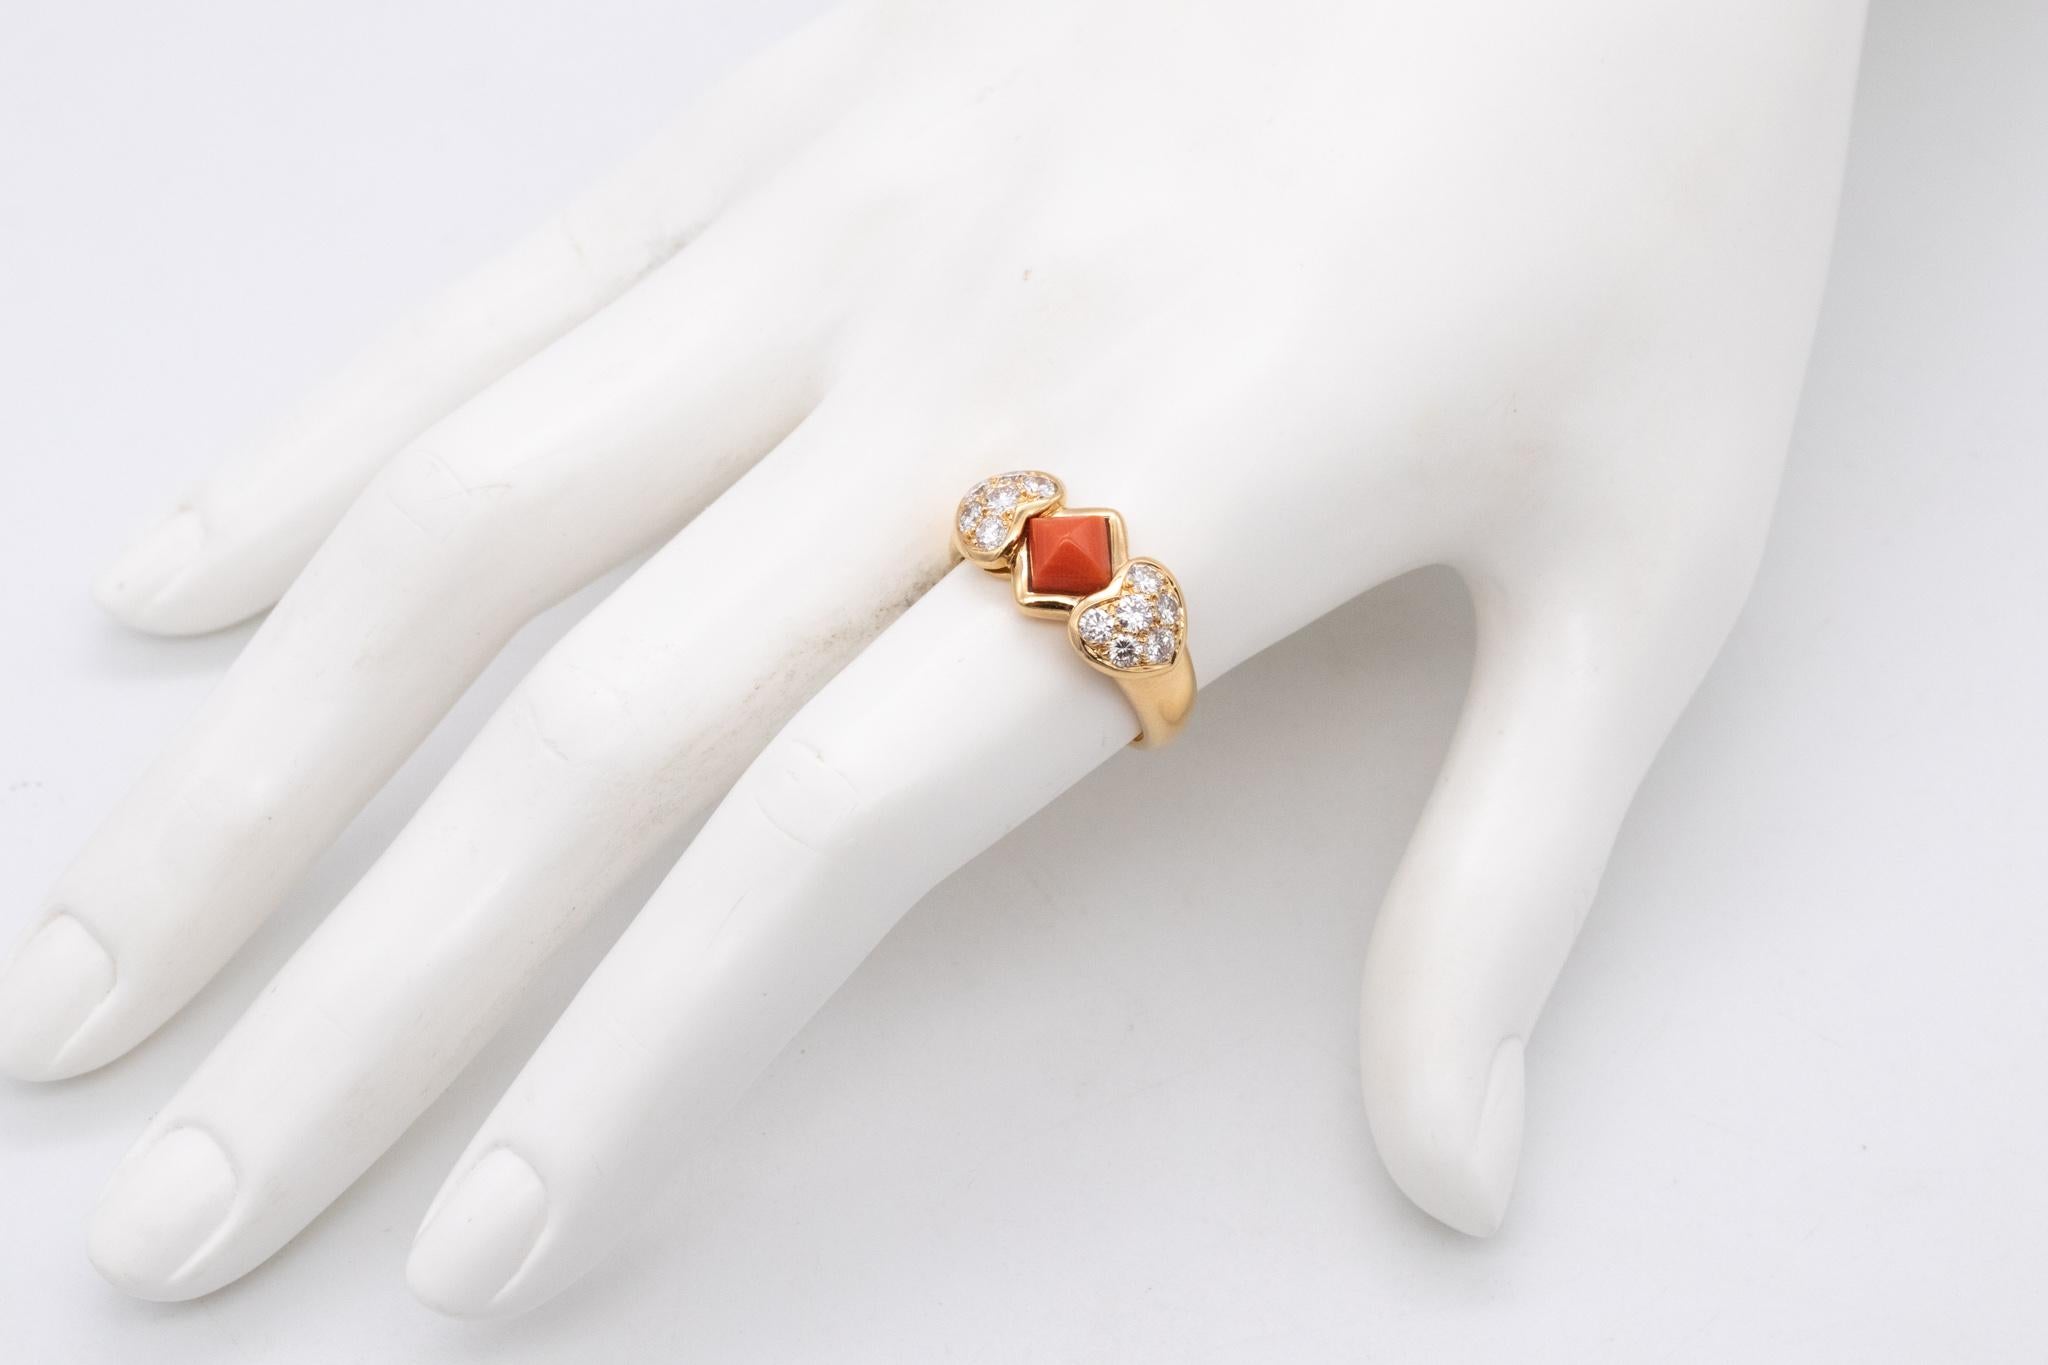 A ring designed by Christian Dior.

Colorful piece, crafted in Paris France in solid 18 karats of high polished yellow gold. Bezel set at top, with a sugar-loaf cabochon cut of a natural salmon coral of about 1 carat.

Is accented at the sides, with